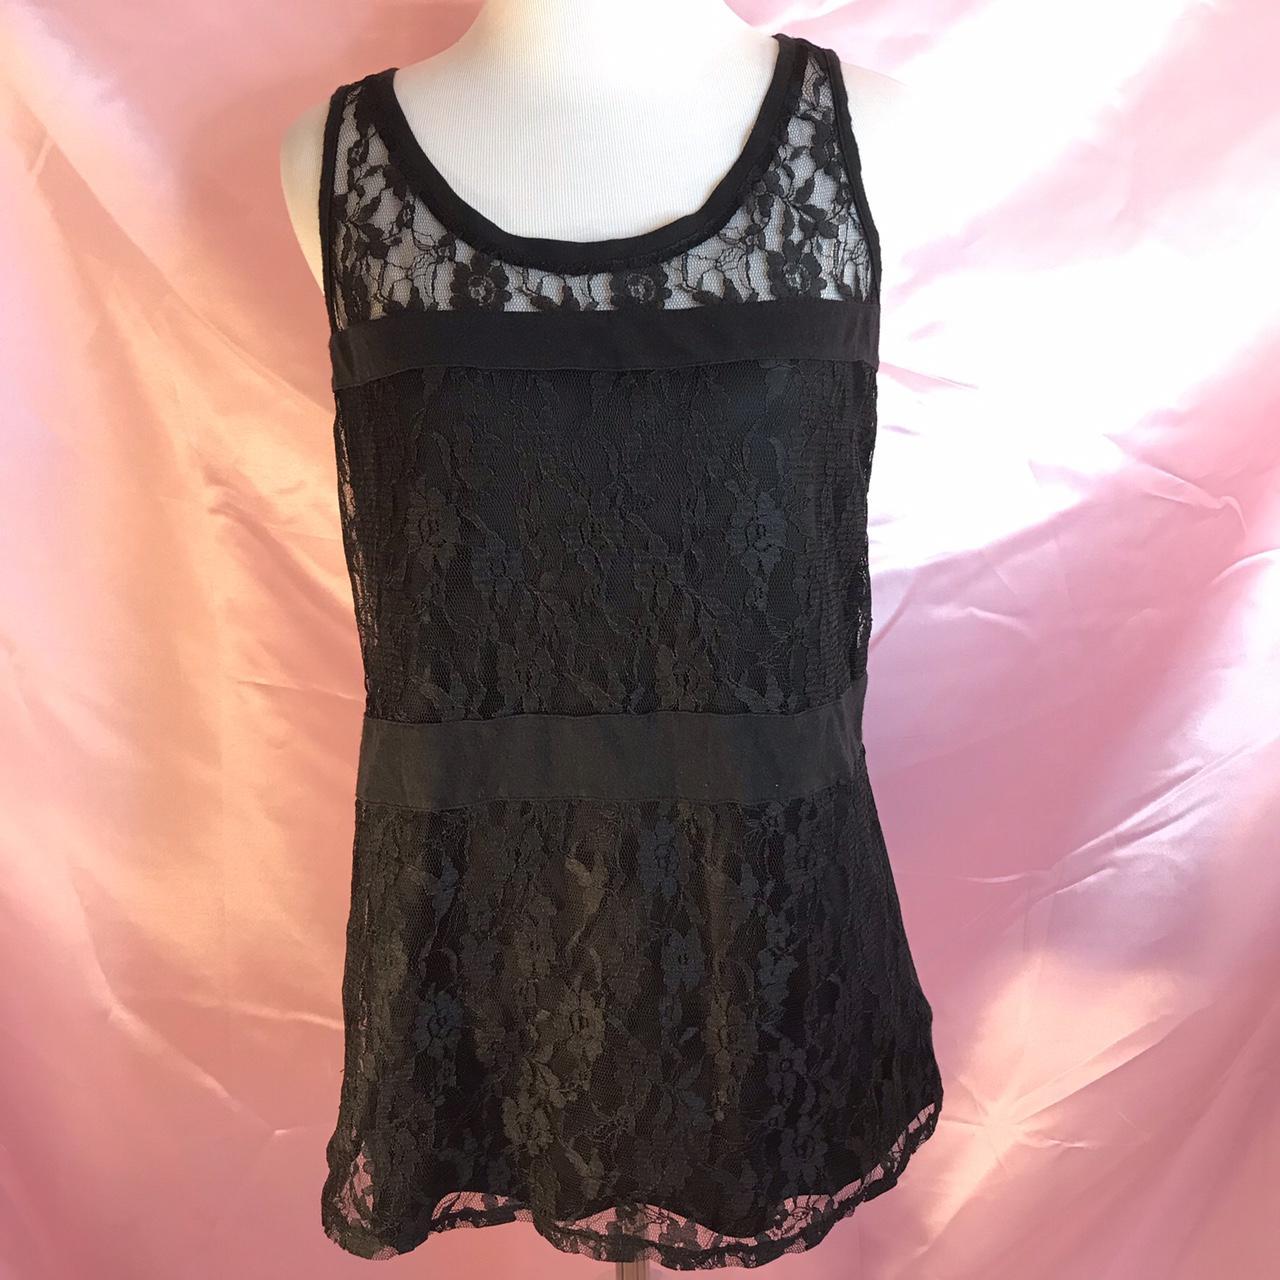 Product Image 1 - Express black lace tank top